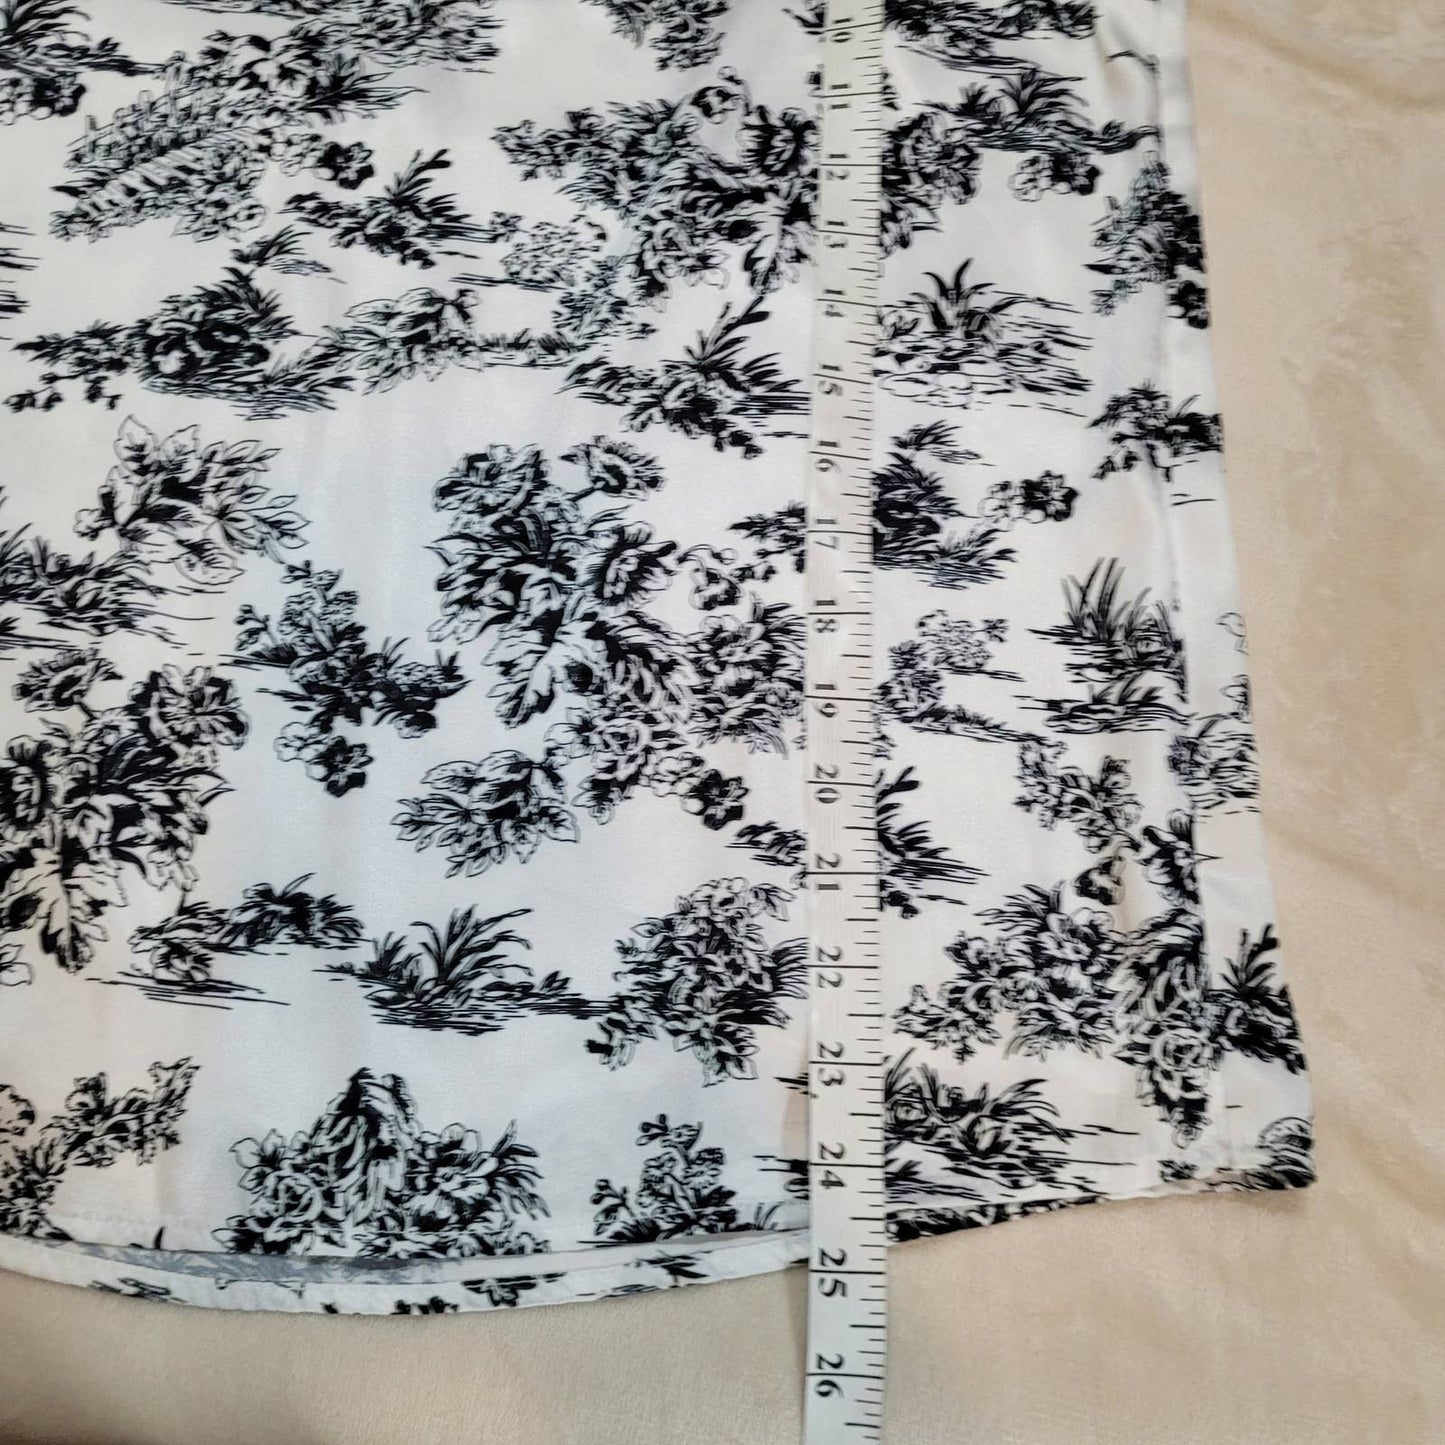 Judith & Charles Black and White Floral Sleeveless Top - Size 2